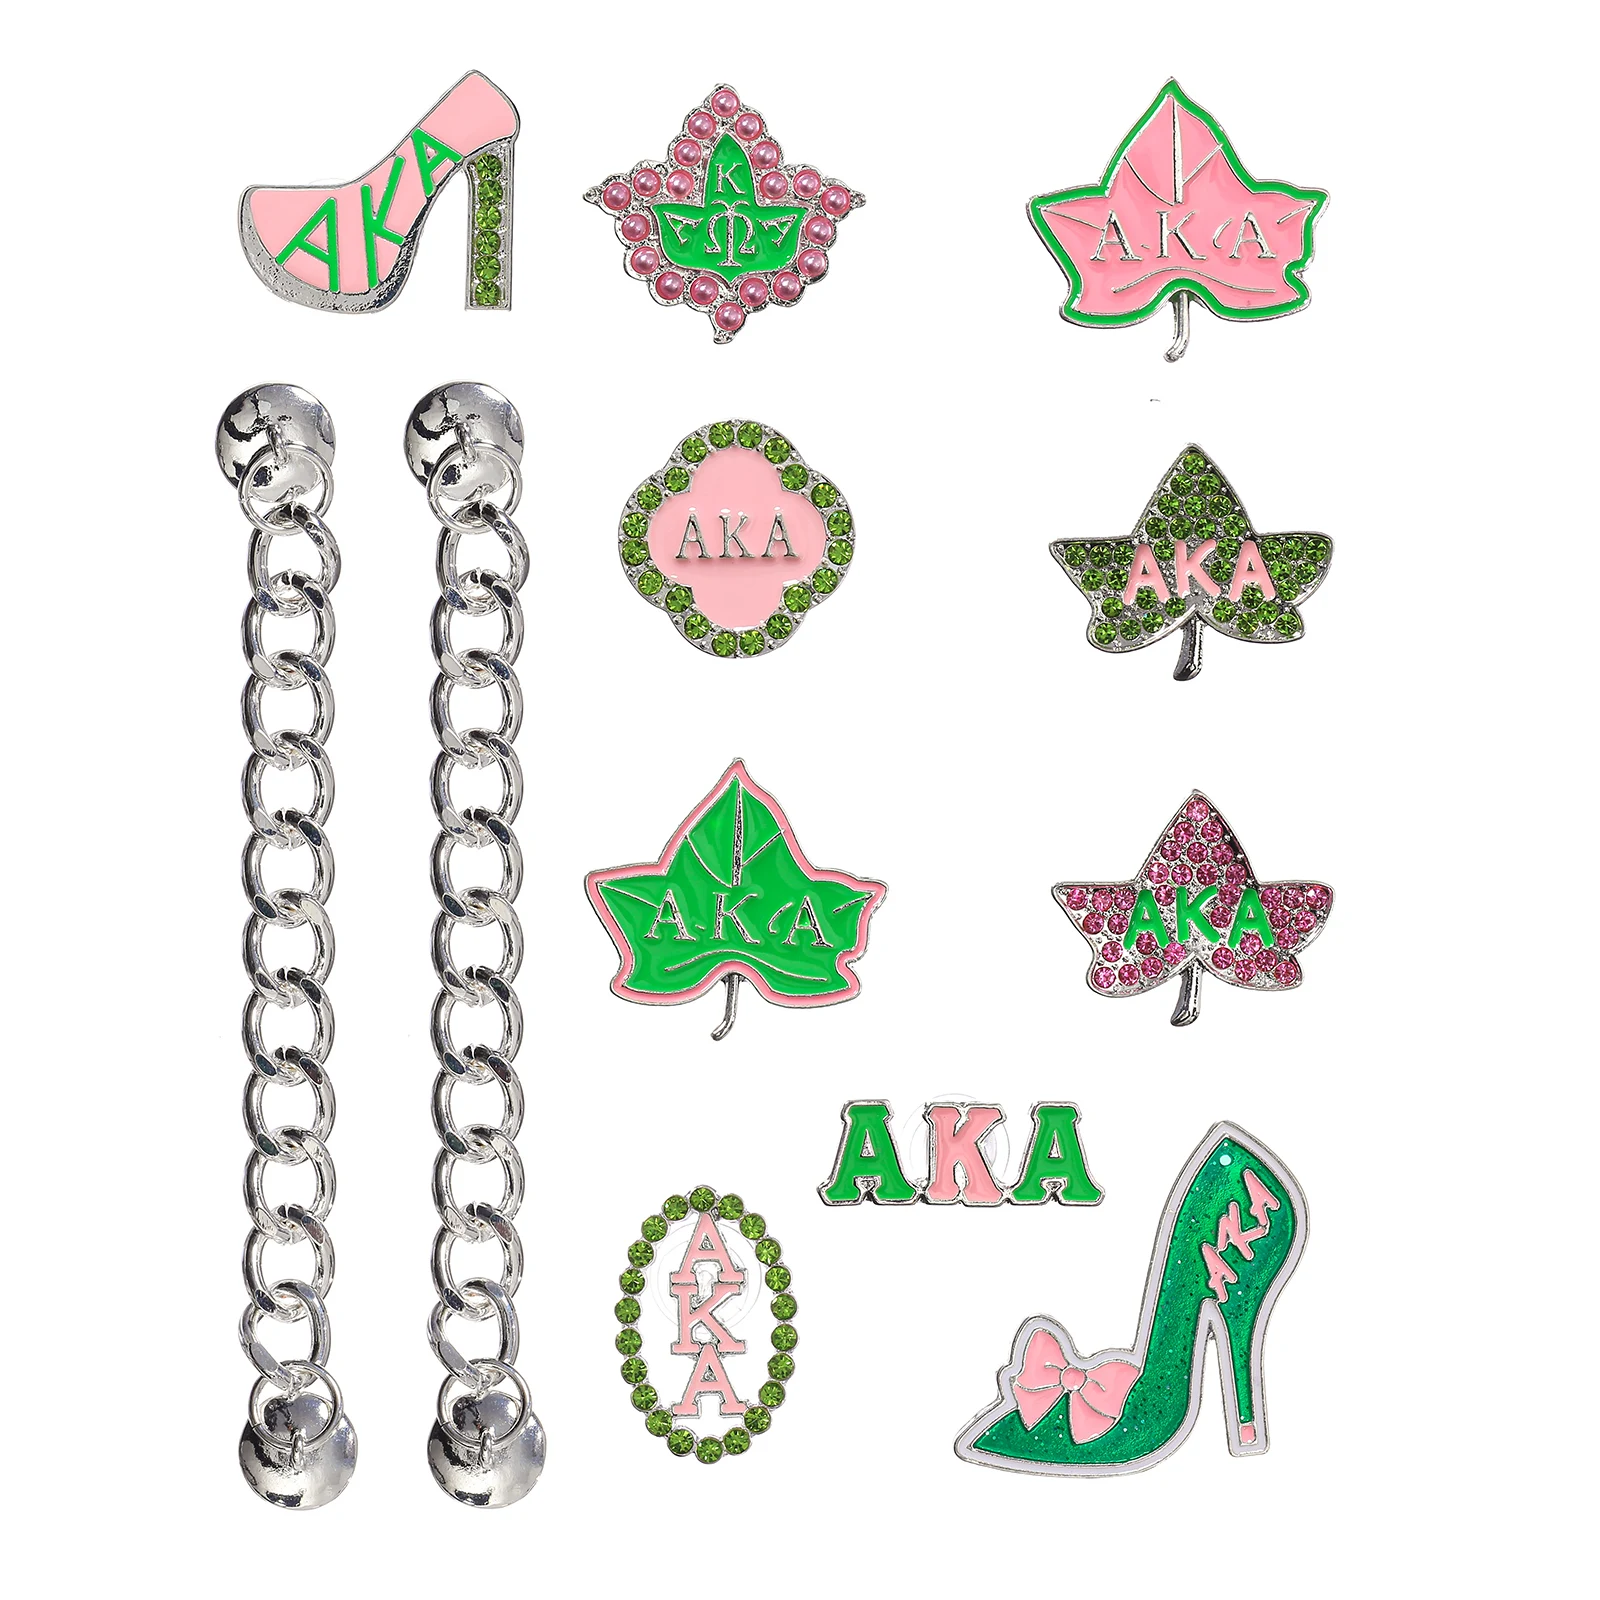 12pcs Aolly AKA Sorority Shoe Charms Set Accessories Decorations Croc Jibz Buckle for DIY X-mas Gift CBC159